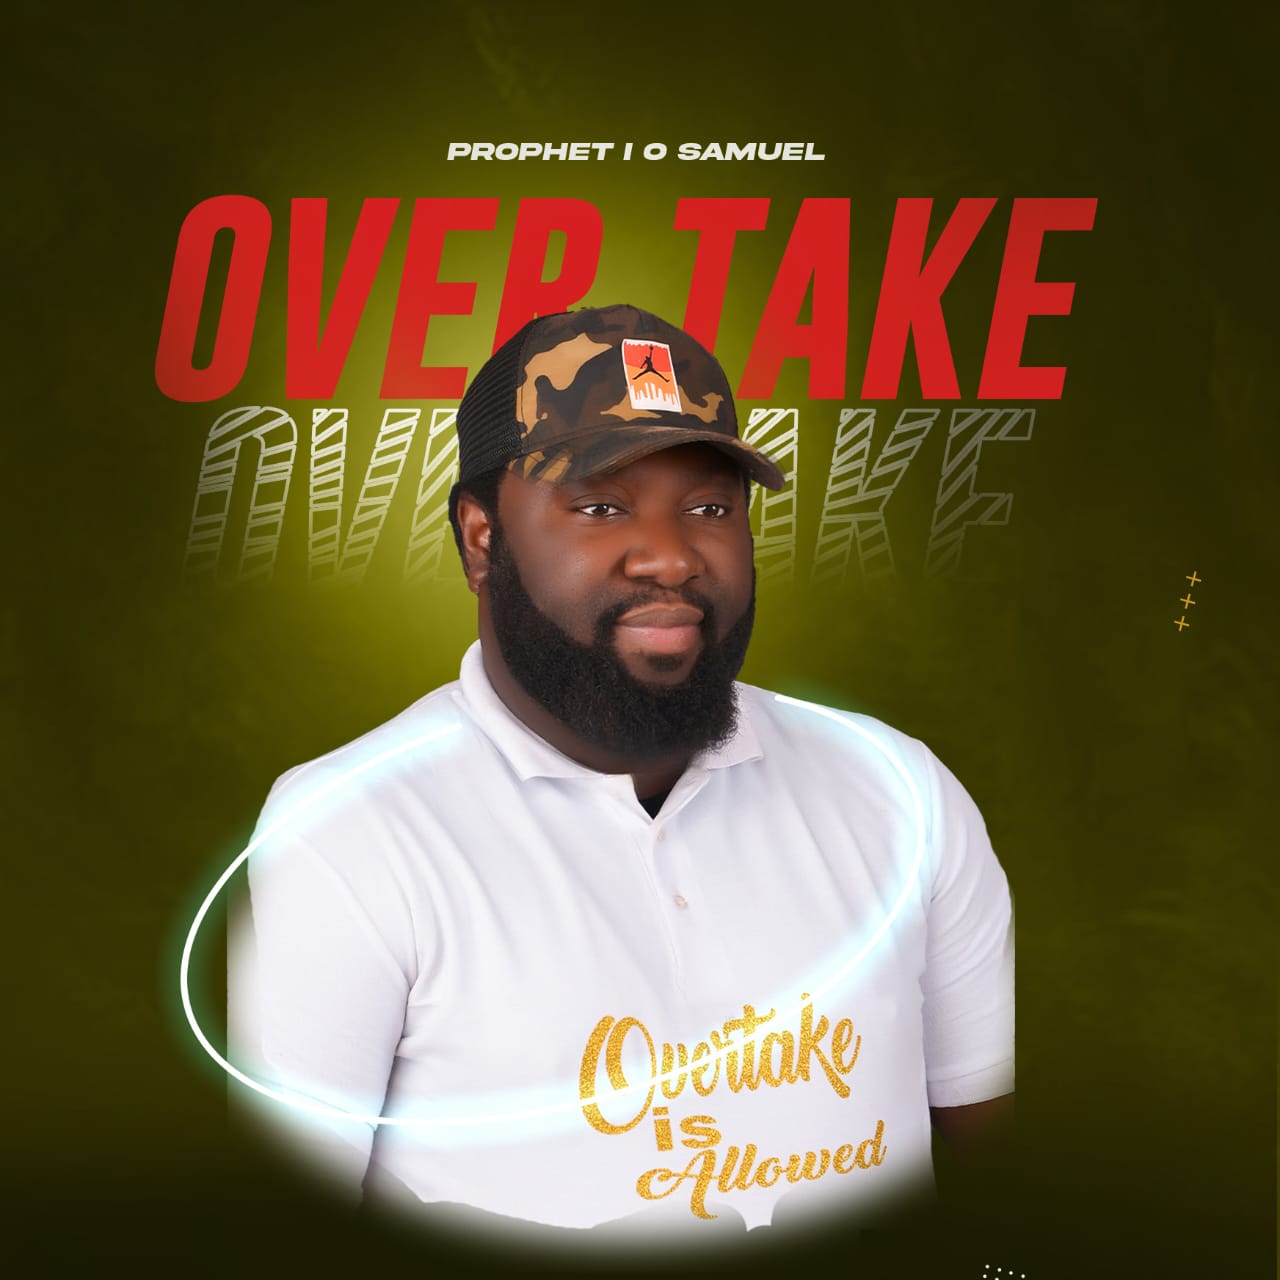 OVERTAKE is a song  of hope and Inspirations by Prophet O Samuel